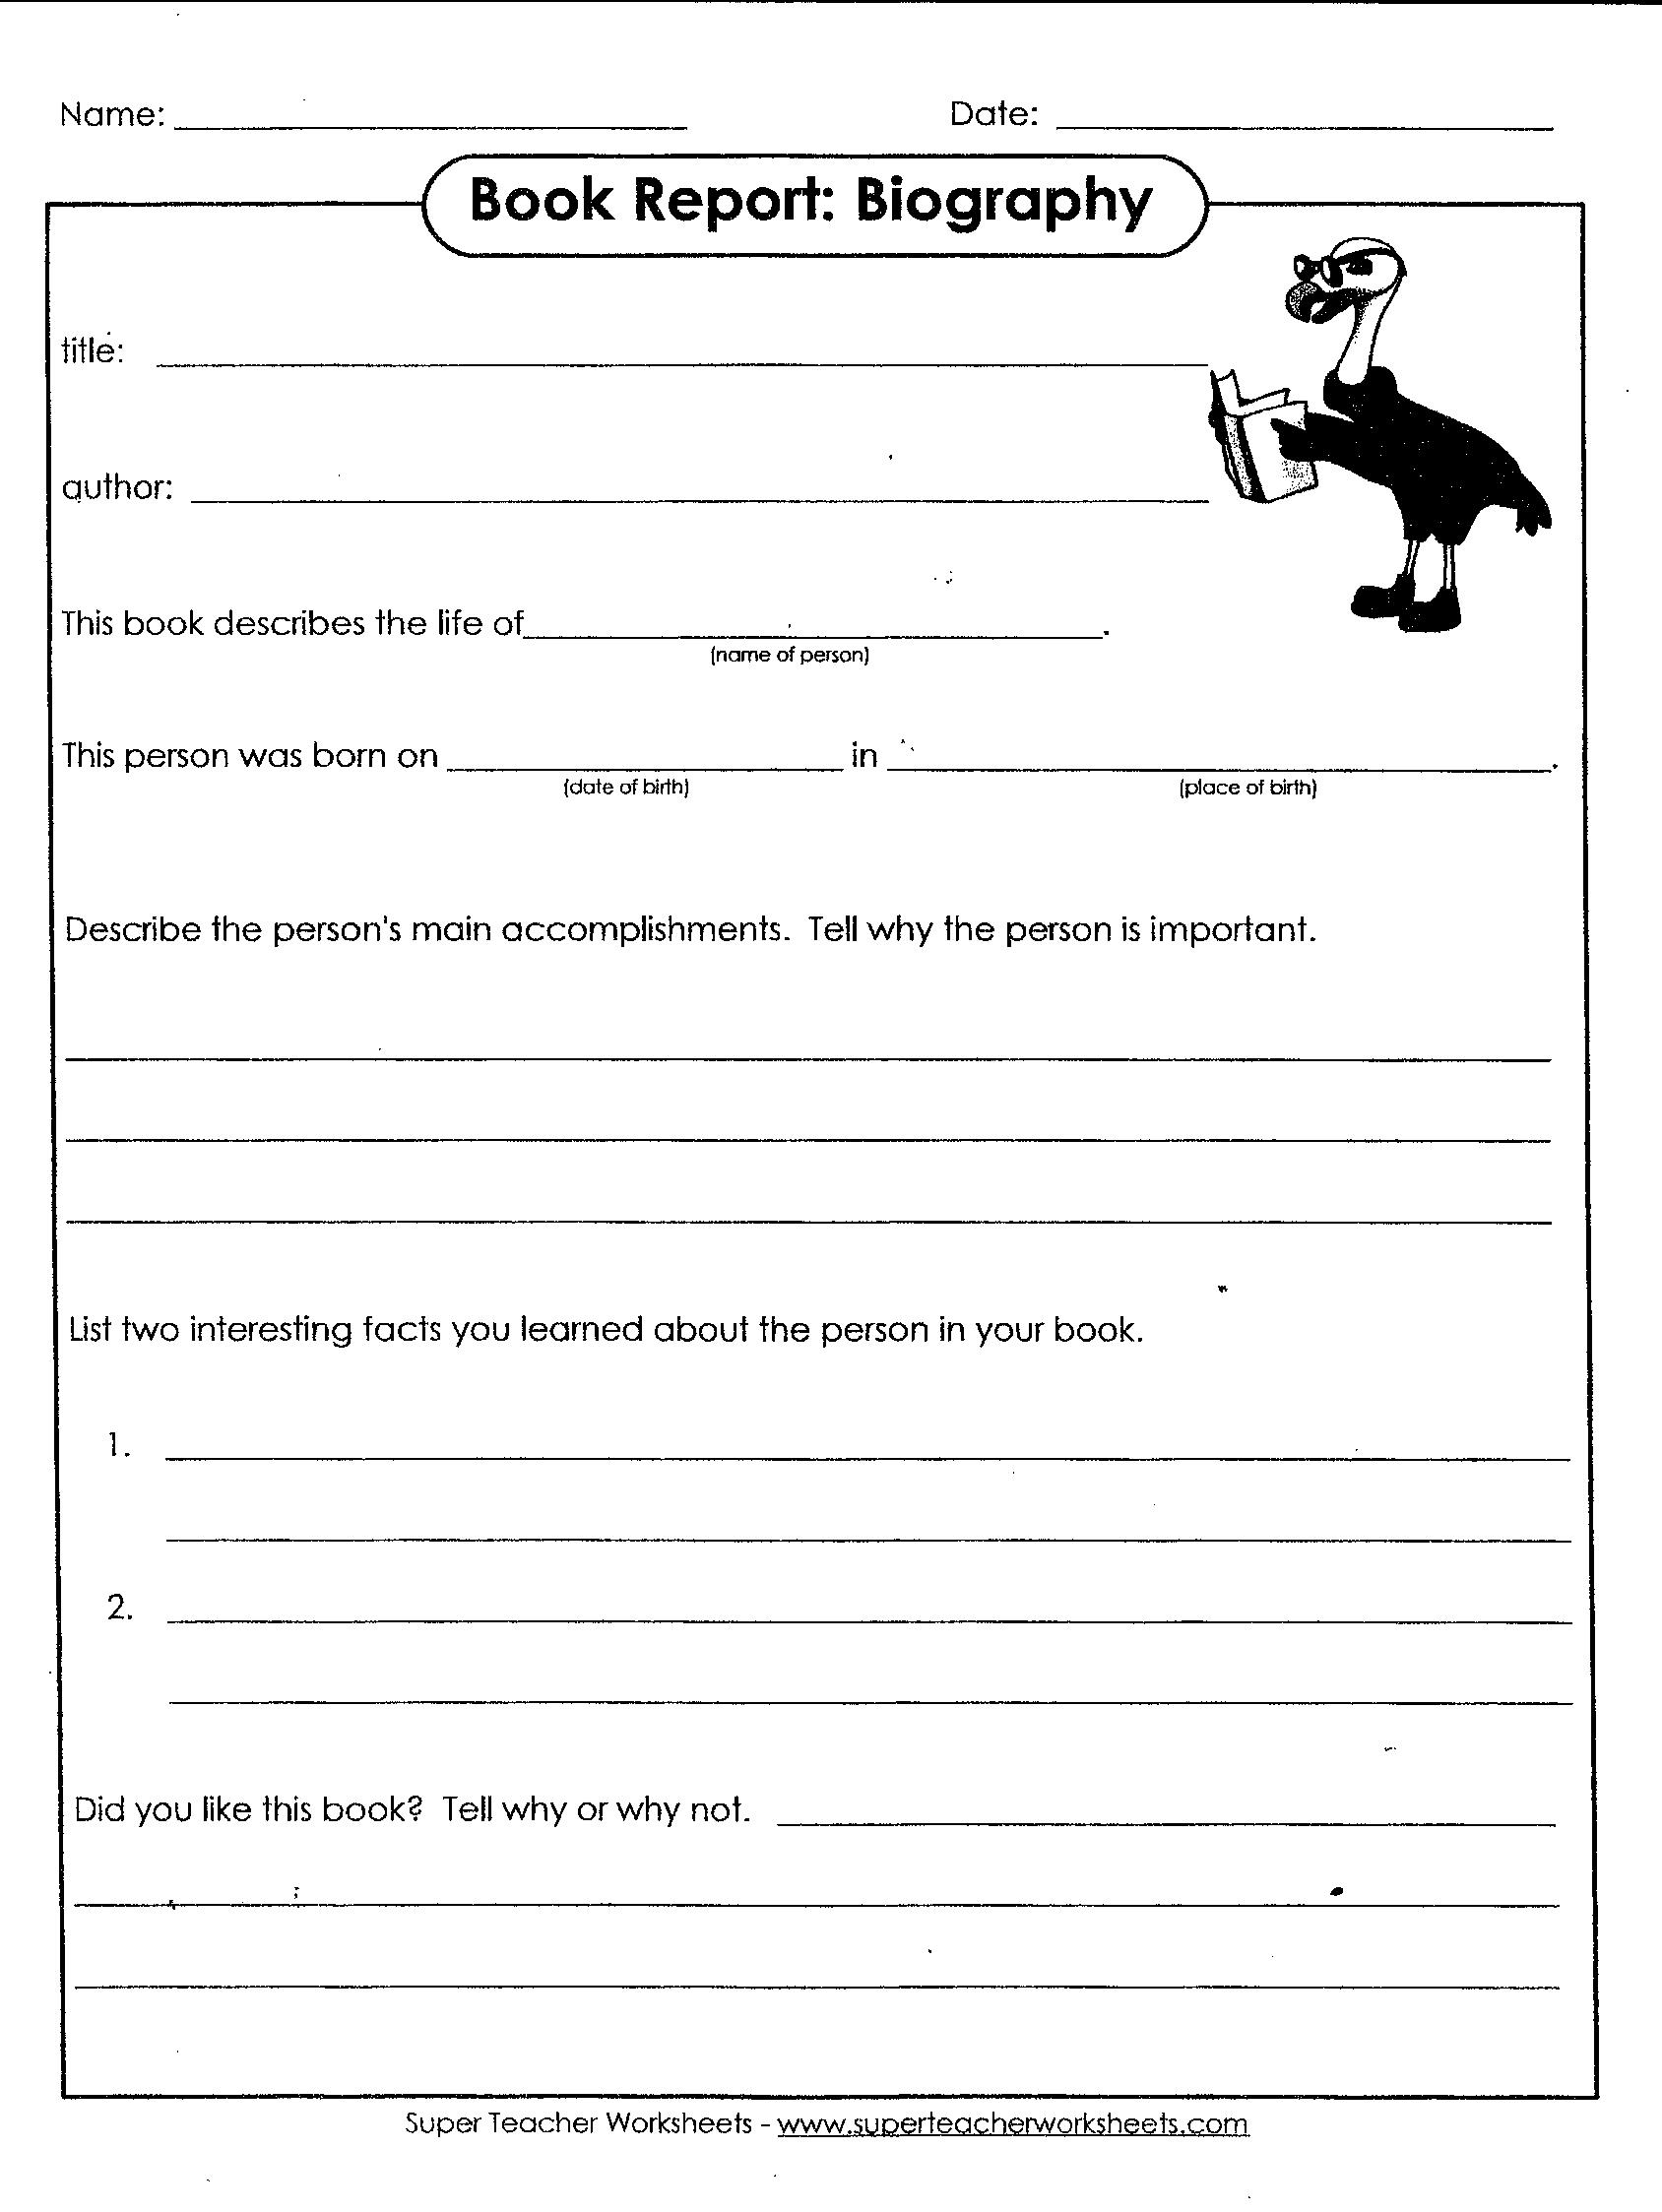 Book Reports For 5Th Graders Biography Report Grade Free Printable - Free Printable Books For 5Th Graders